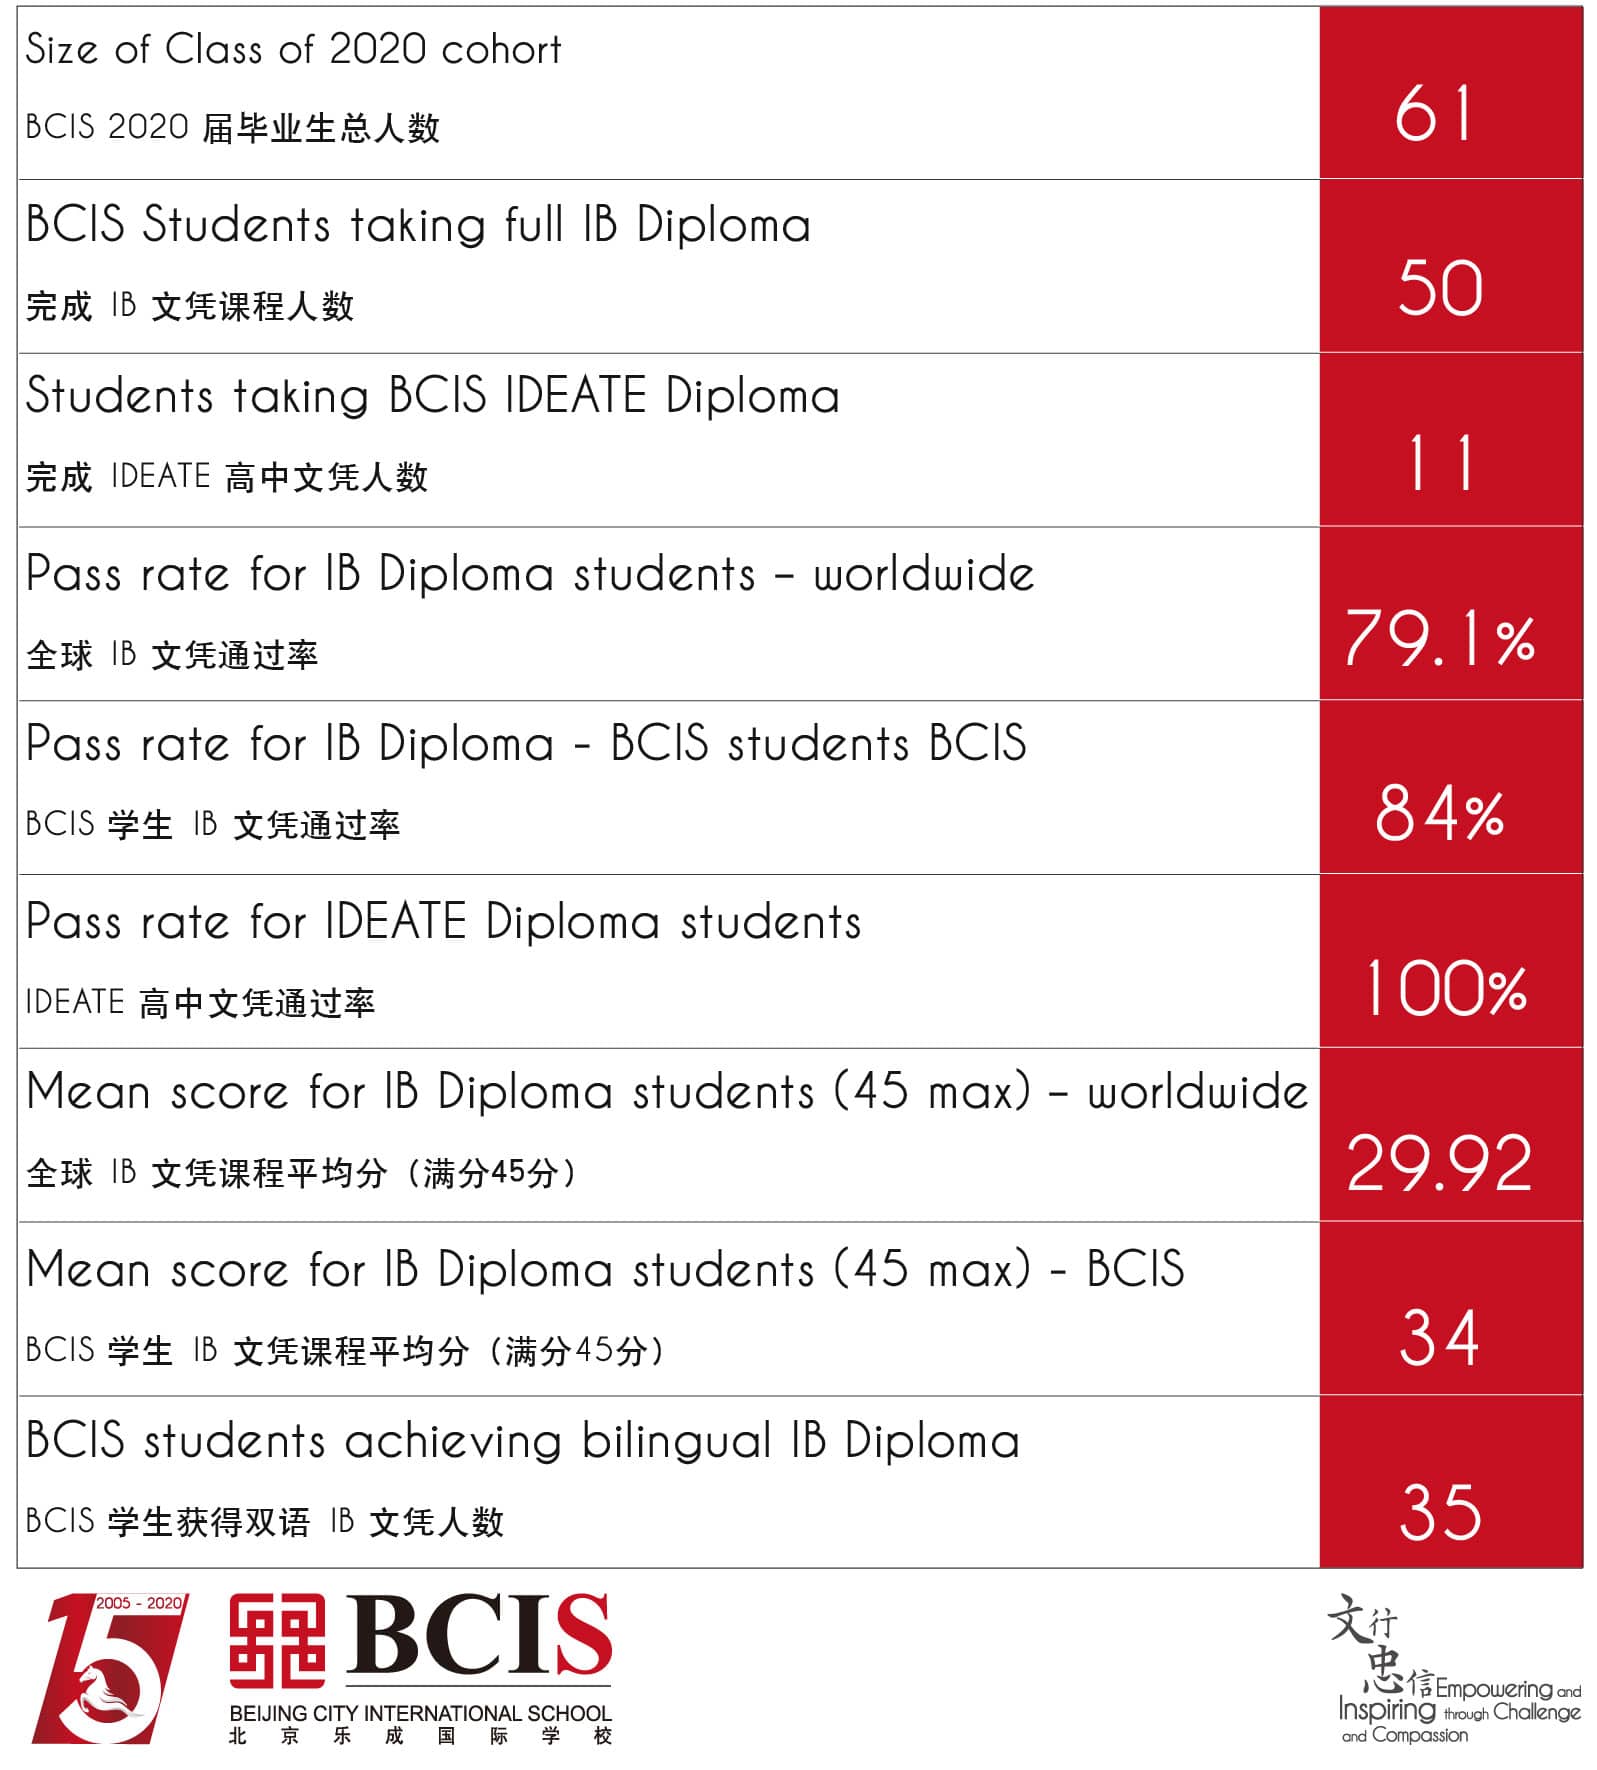 BCIS class of 2020 IB Diploma and IDEATE results